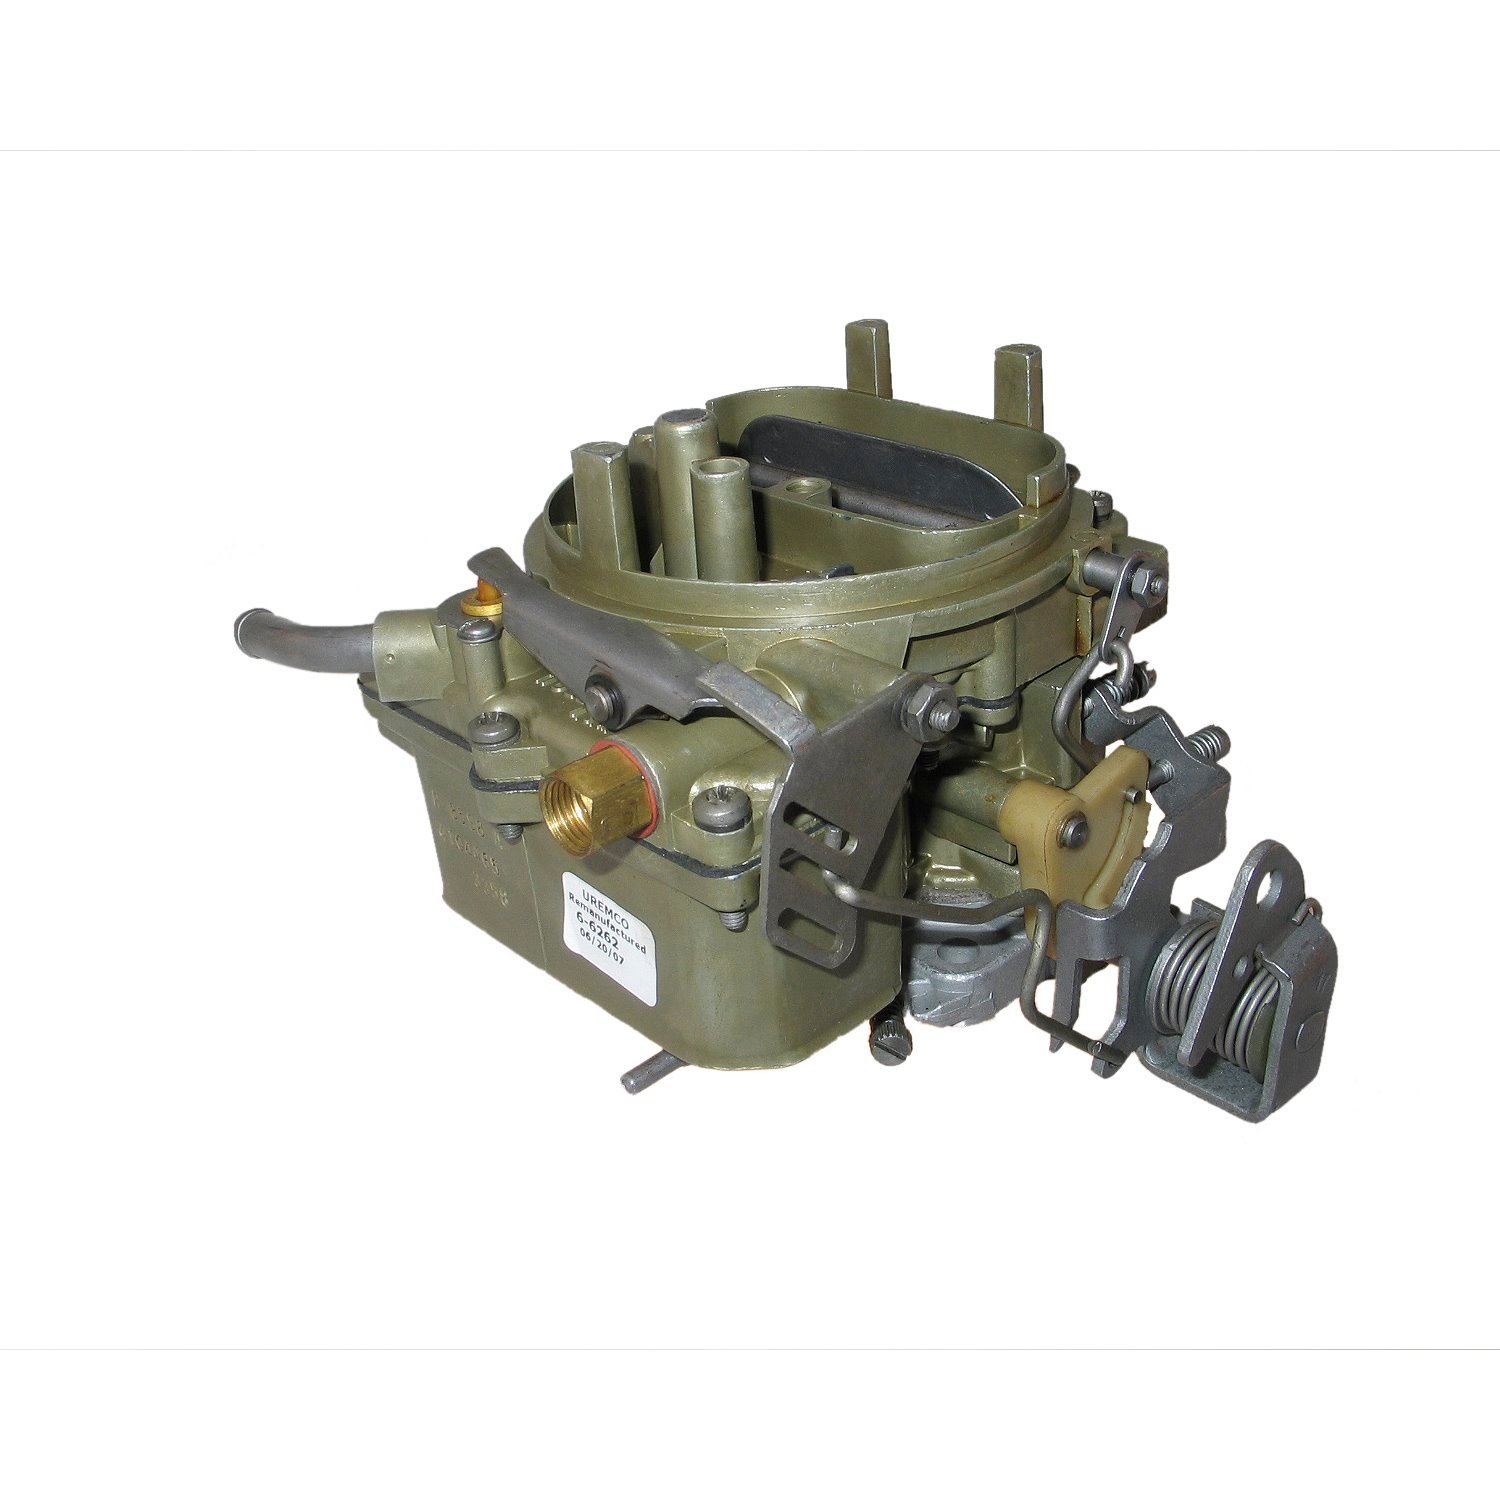 6-6262 Holley Remanufactured Carburetor, 2245, Light Duty-Style